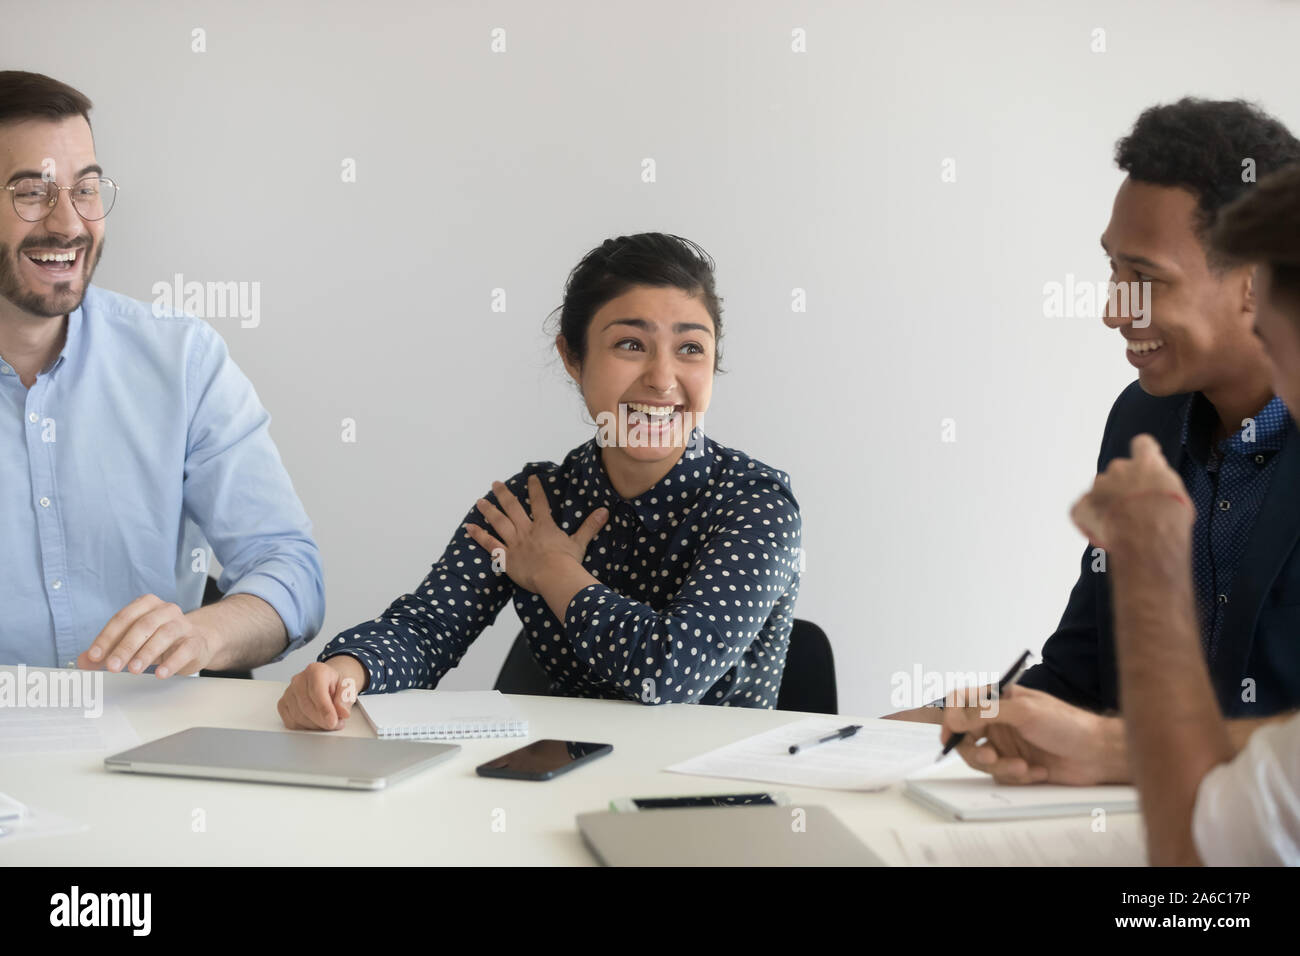 Positive young coworkers discussing project and laughing Stock Photo